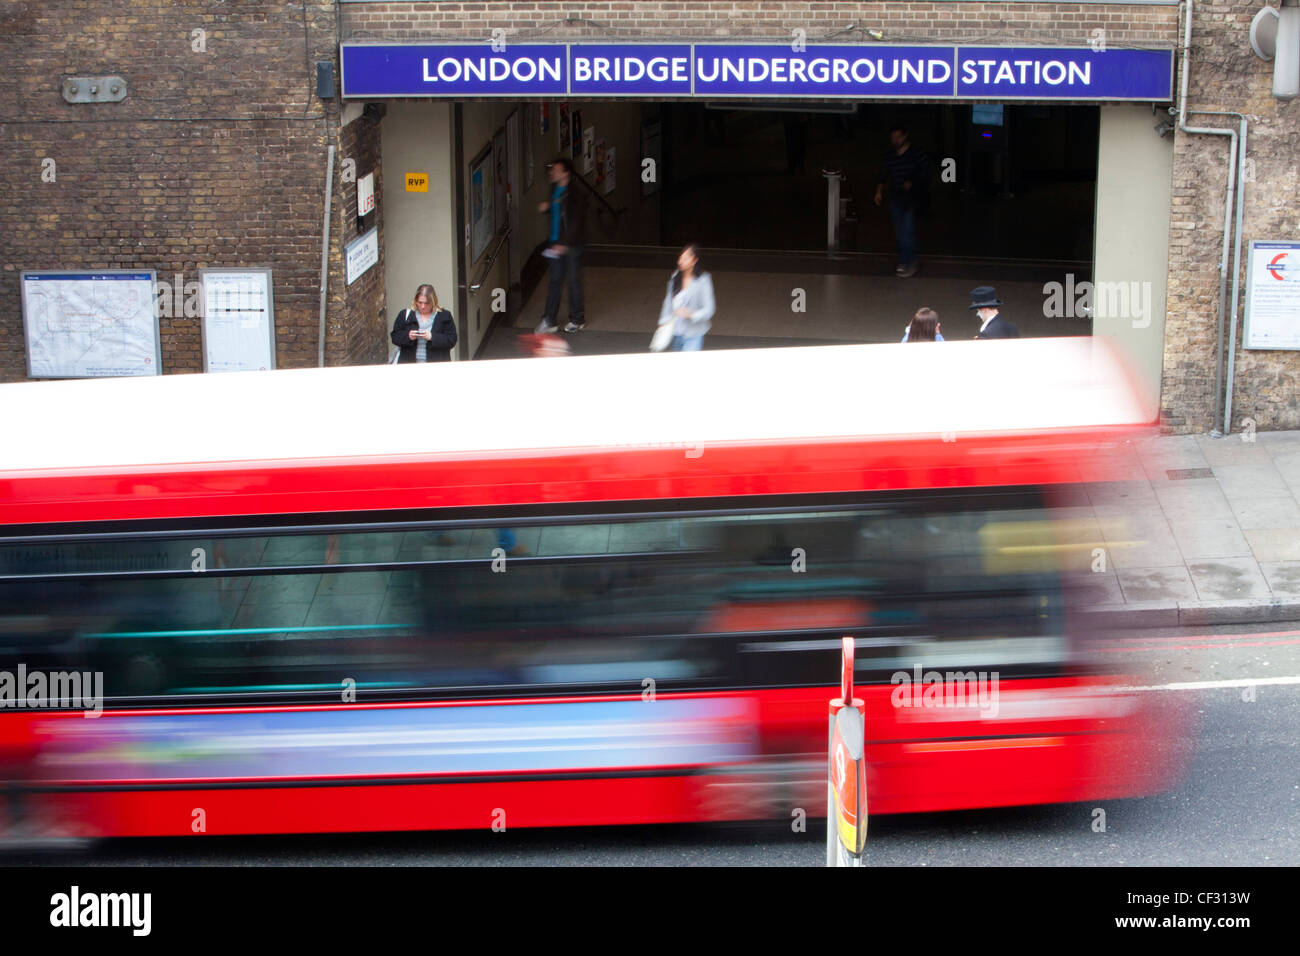 A view of a tradional red London bus as it passes London Bridge underground station Stock Photo